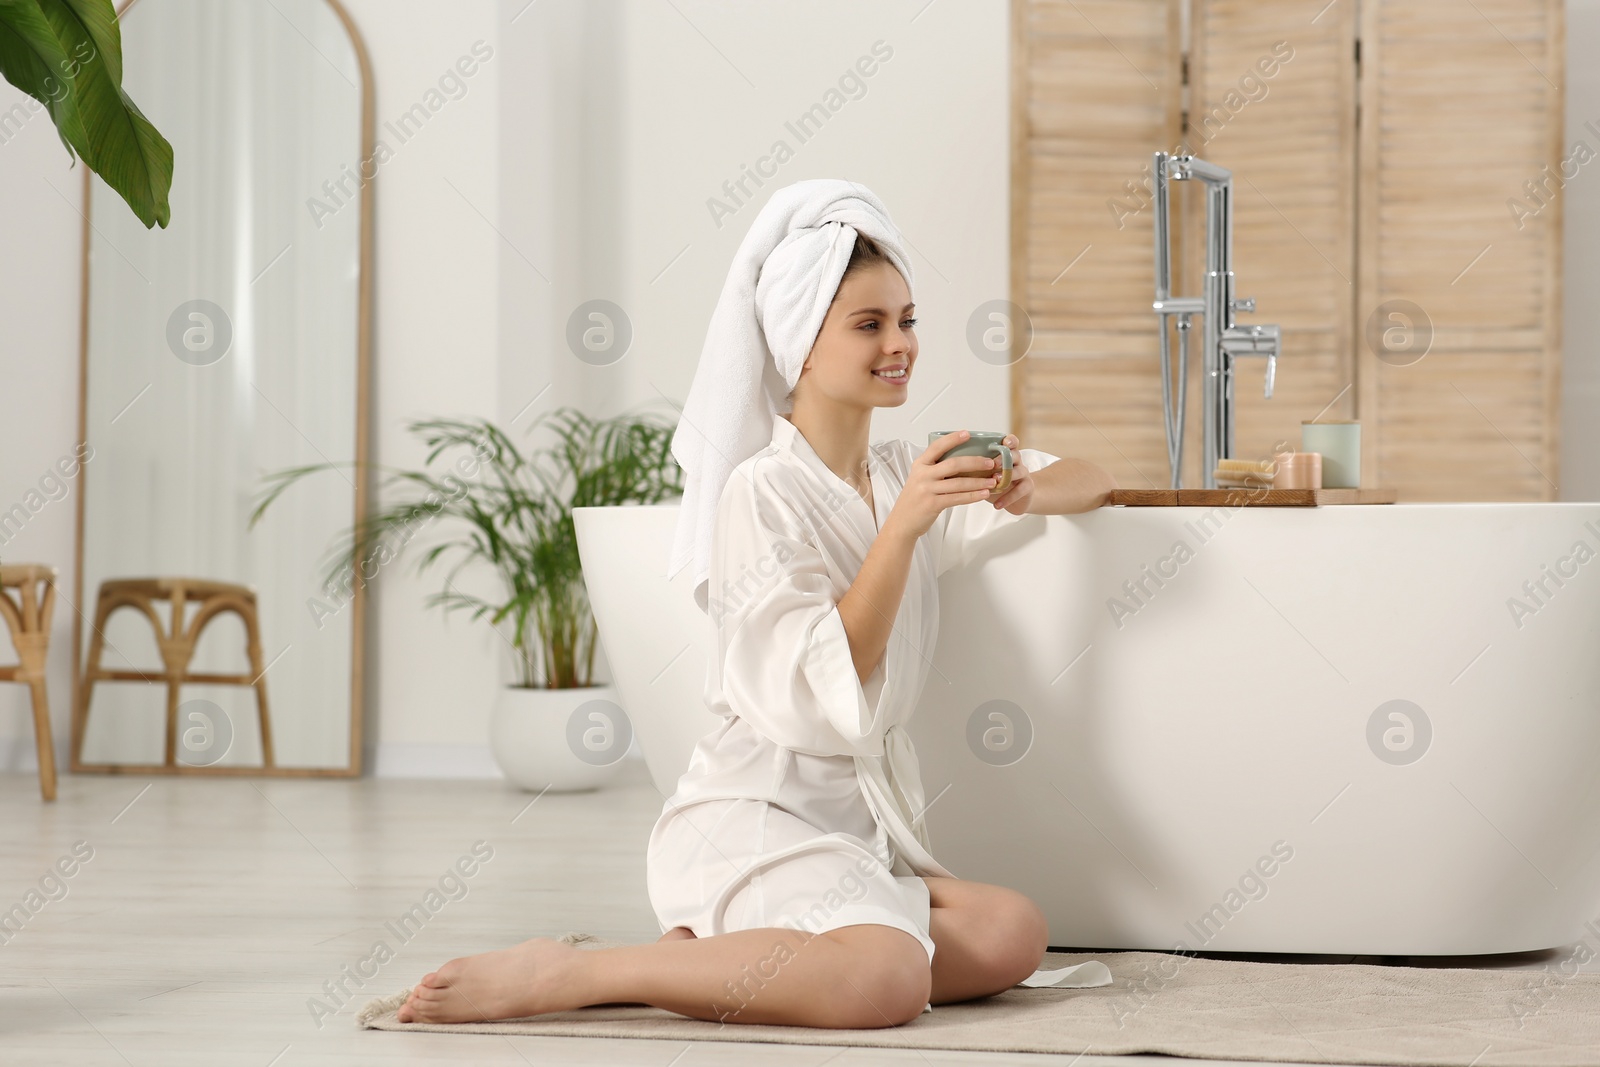 Photo of Beautiful happy woman with cup of hot drink in robe sitting on floor in bathroom